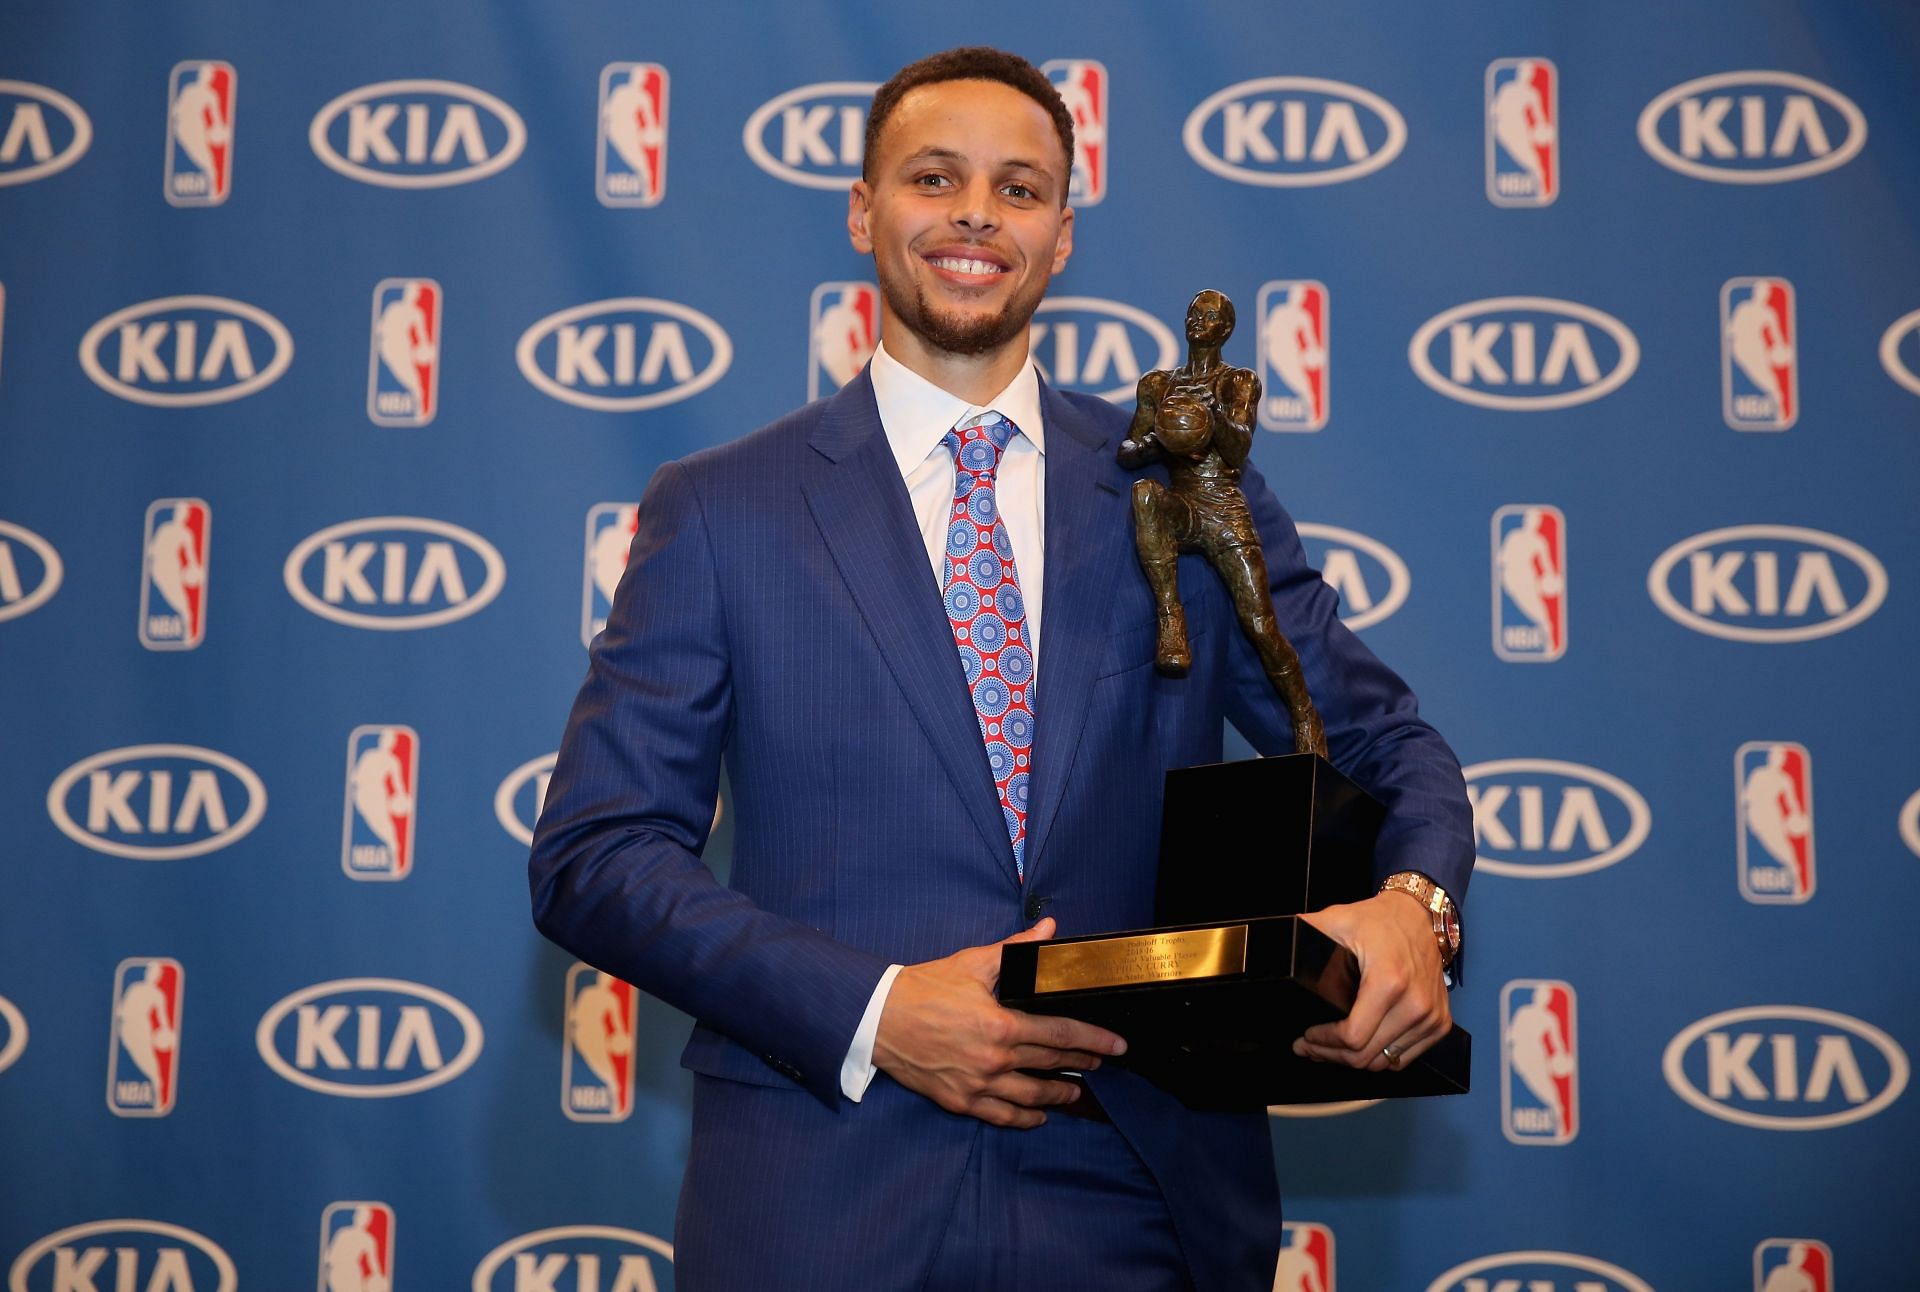 Stephen Curry led the league in scoring last year